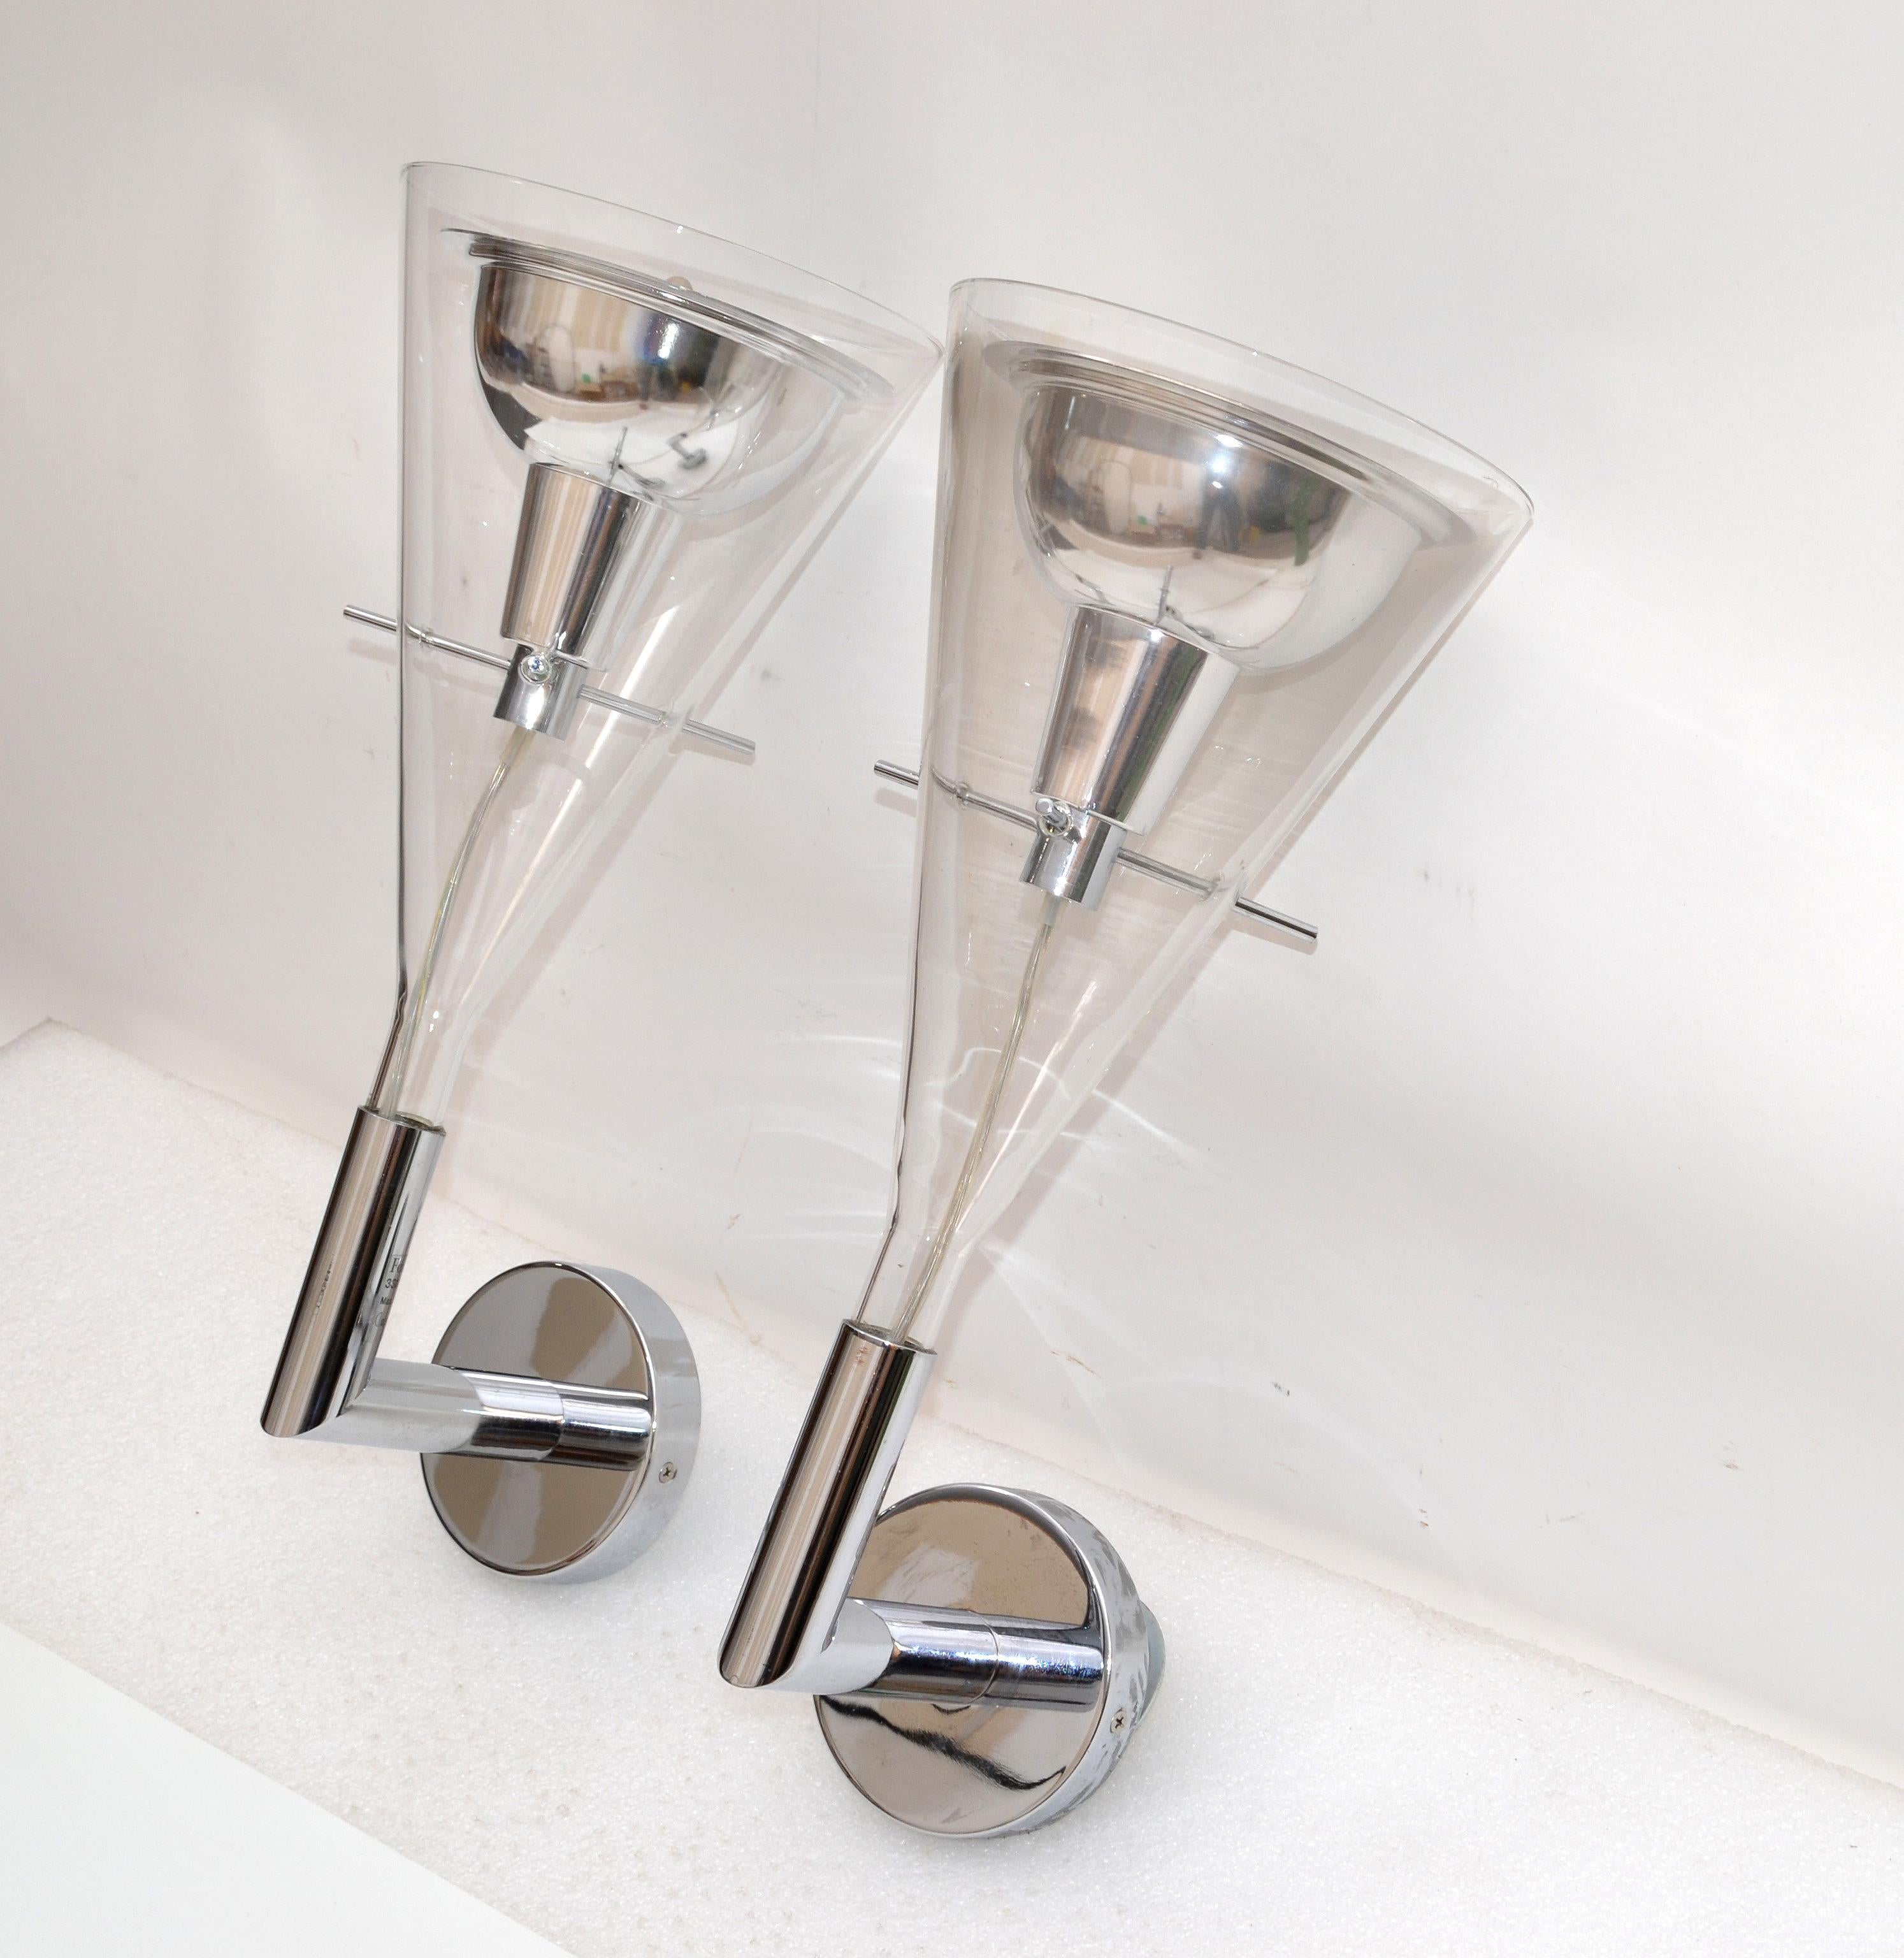 Pair Fontana Arte Flute Glass & Chrome Wall Sconces by Arredo Naskaloris Italy In Good Condition For Sale In Miami, FL